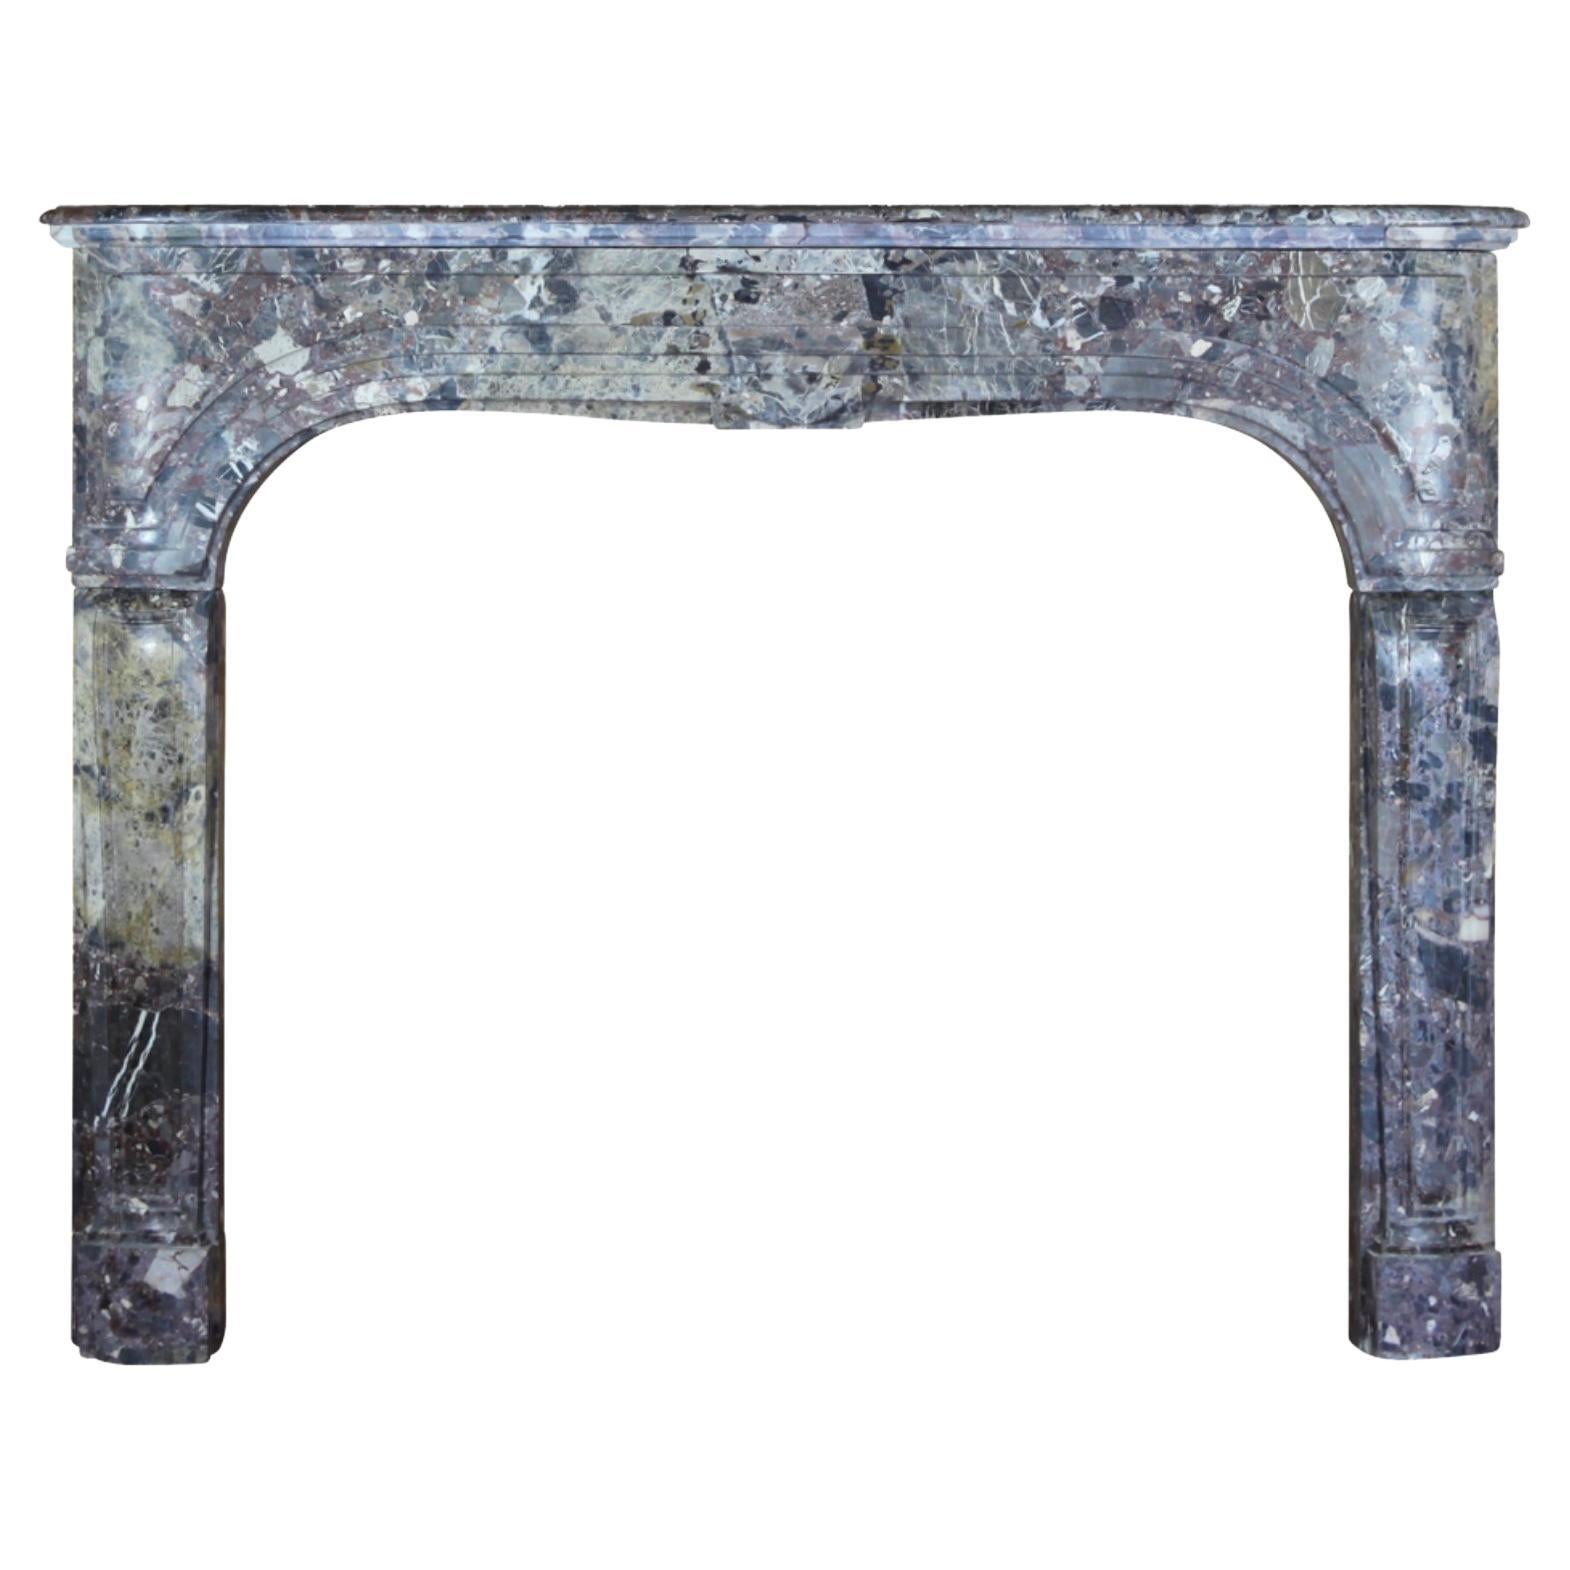 Petite and Fine European Antique Fireplace Surround for Timeless Interior